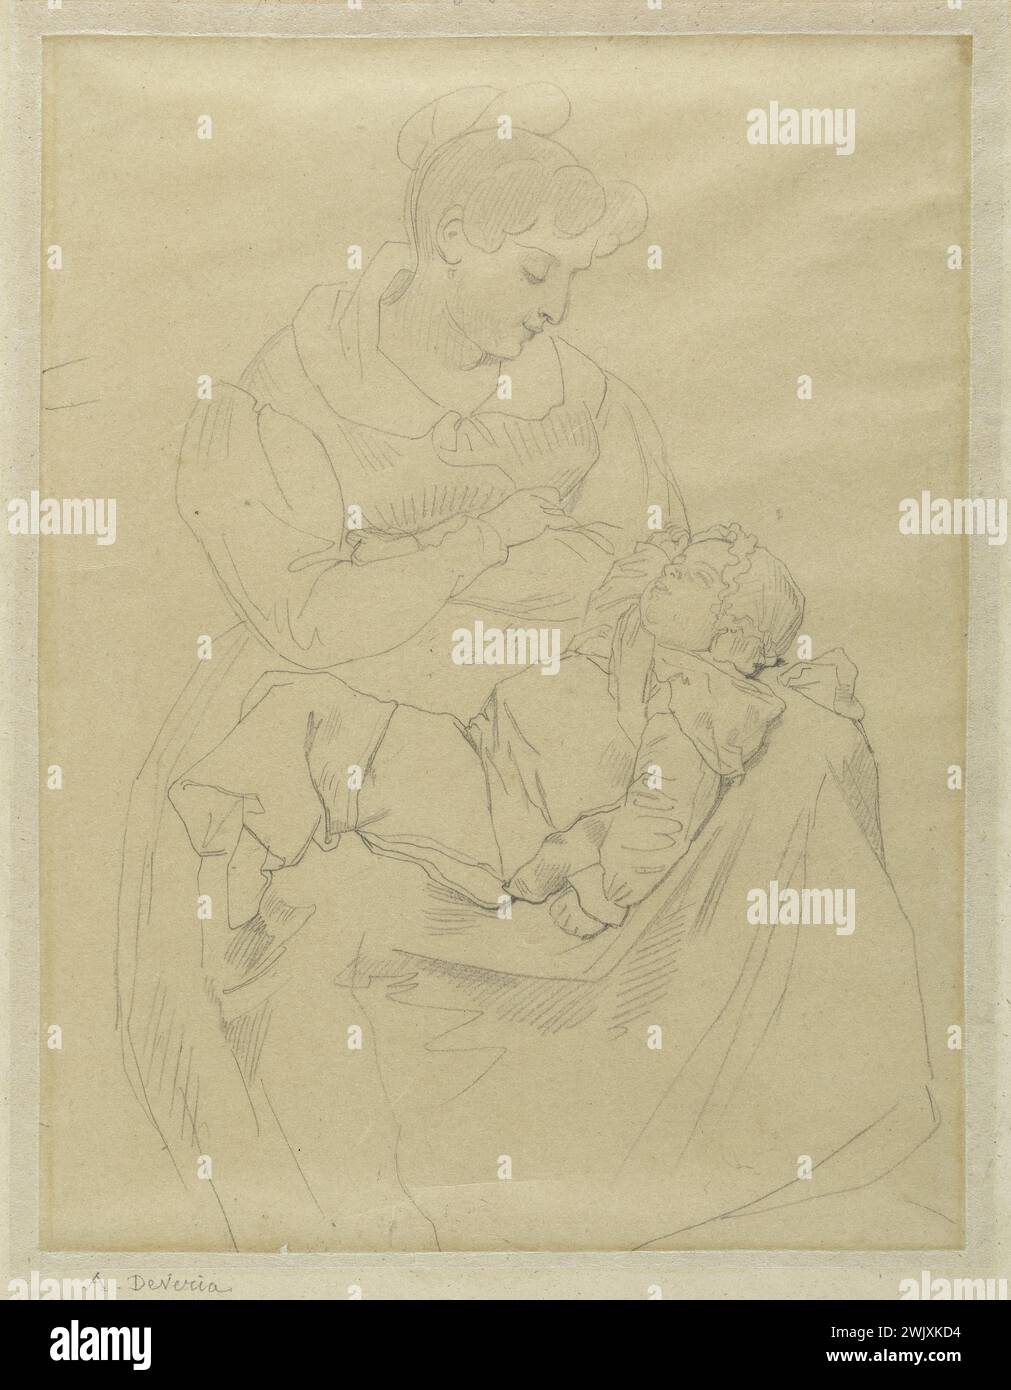 Achille Devéria. 'Mrs. Hugo and Léopoldine'. Graphite pencil on layer paper. Around 1825. Paris, house of Victor Hugo. 52739-15 Bebe, drawing, French writer, in the foot, wife, family, woman, daughter, mothering, portrait, 19th XIXth 19th 19th 19th 19th century Stock Photo